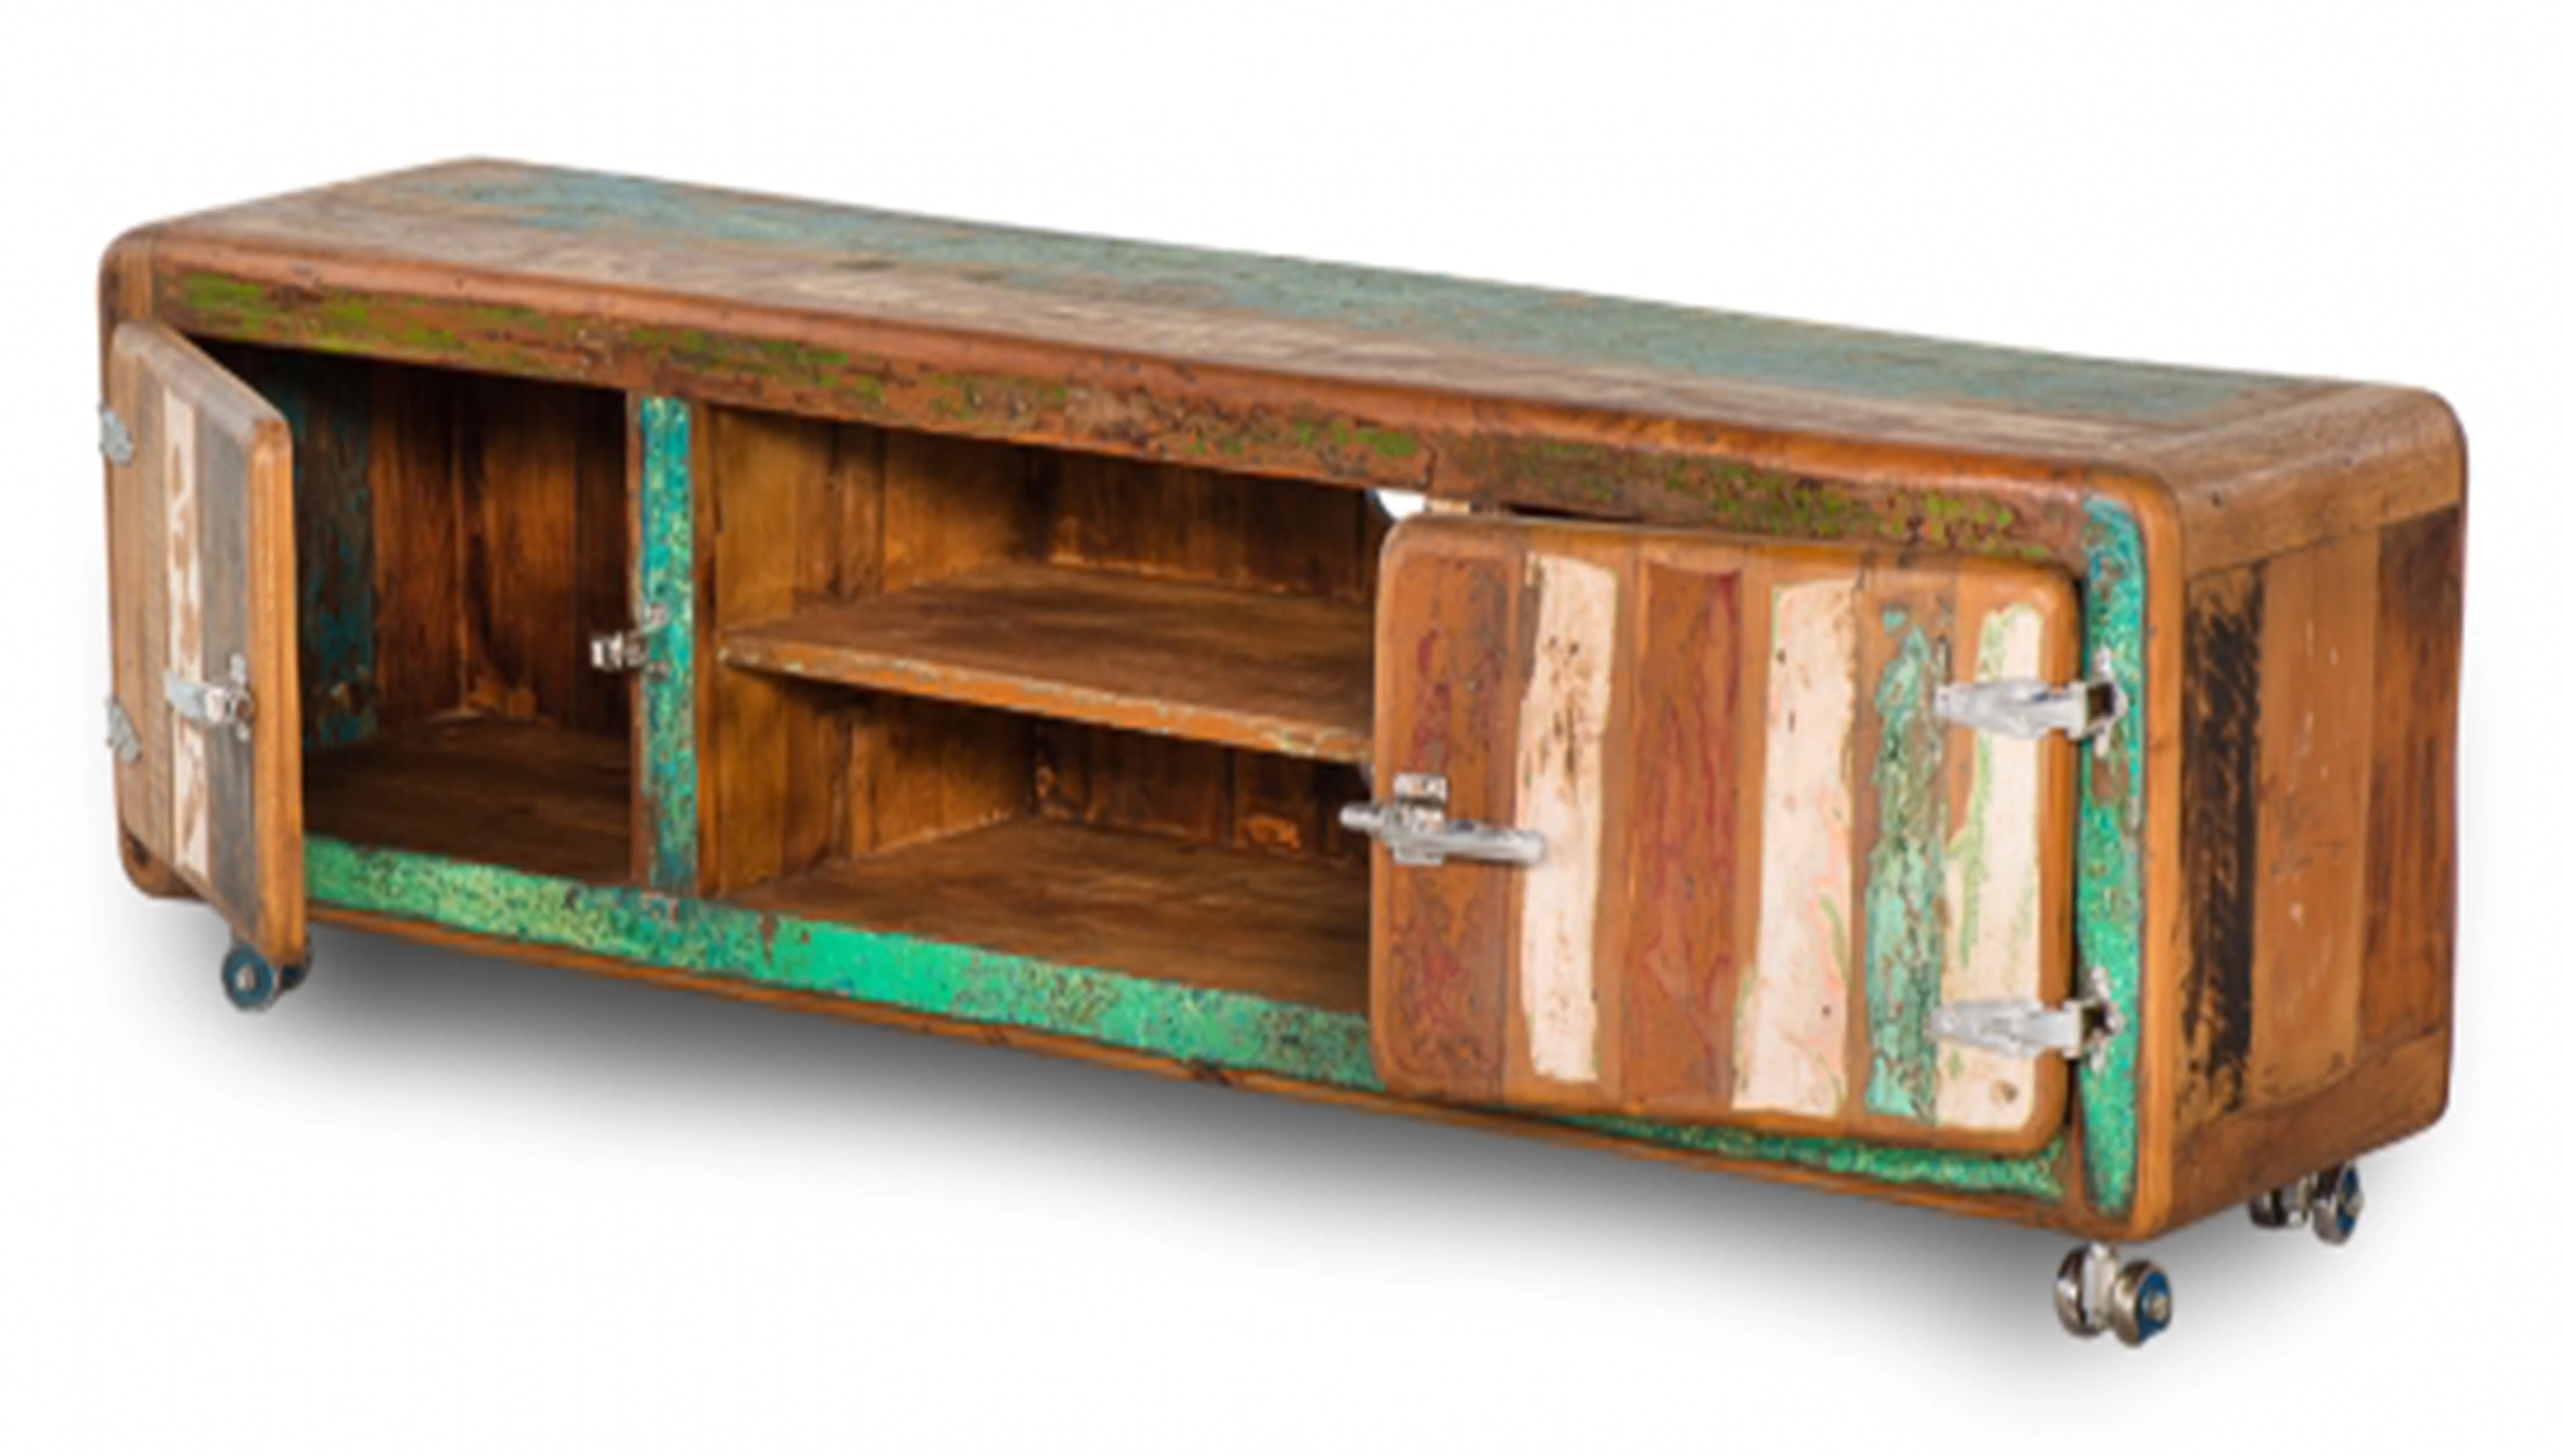 Reclaimed Ice Box T. V. Cabinet with 2 Doors on Rollers - popular handicrafts